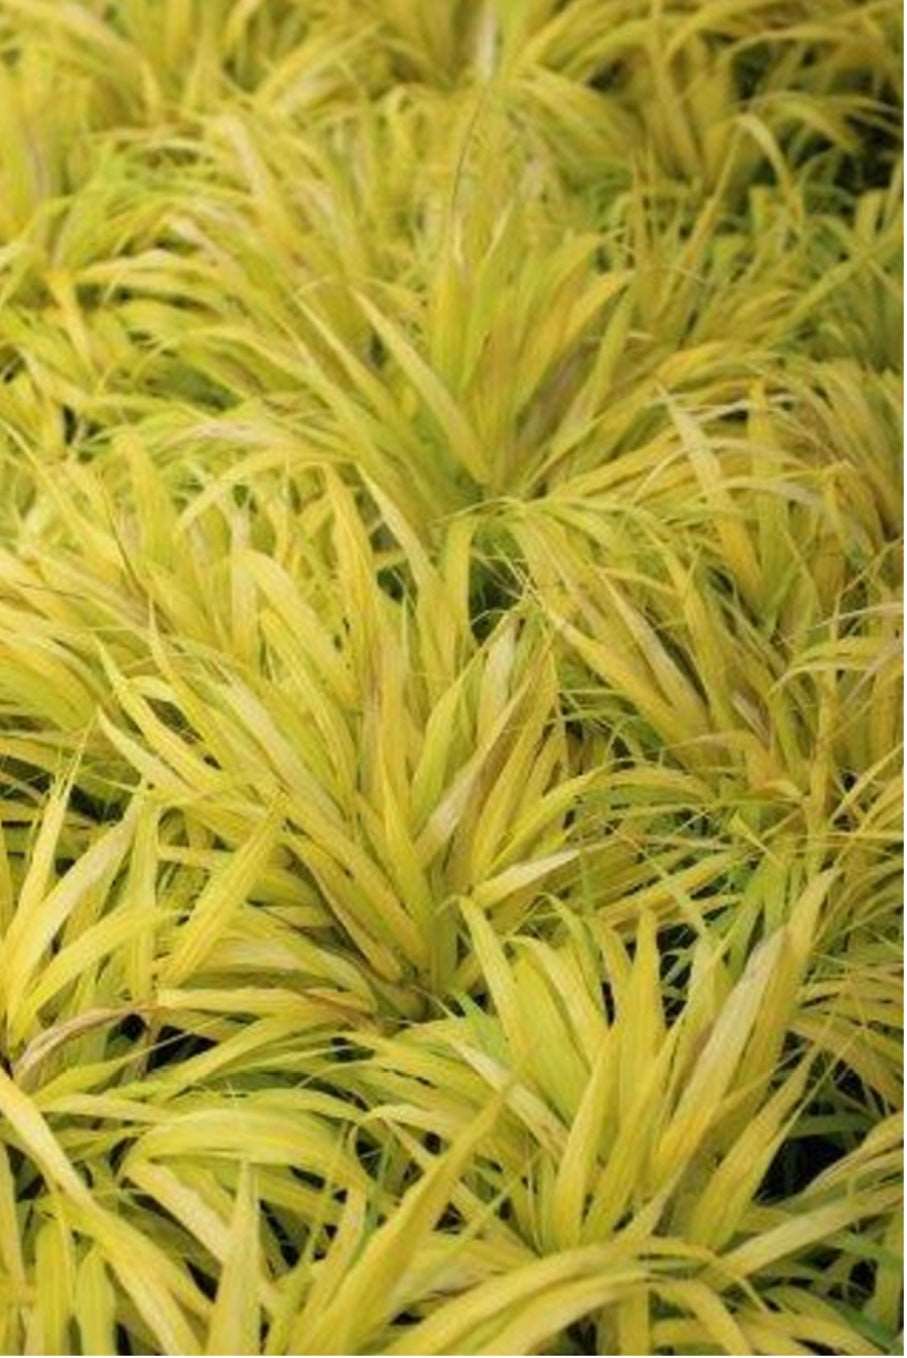 All Gold Japanese Forest Grass HAKONECHLOA MACRA 'ALL GOLD' Plant One Gallon Size Healthy Harvesters